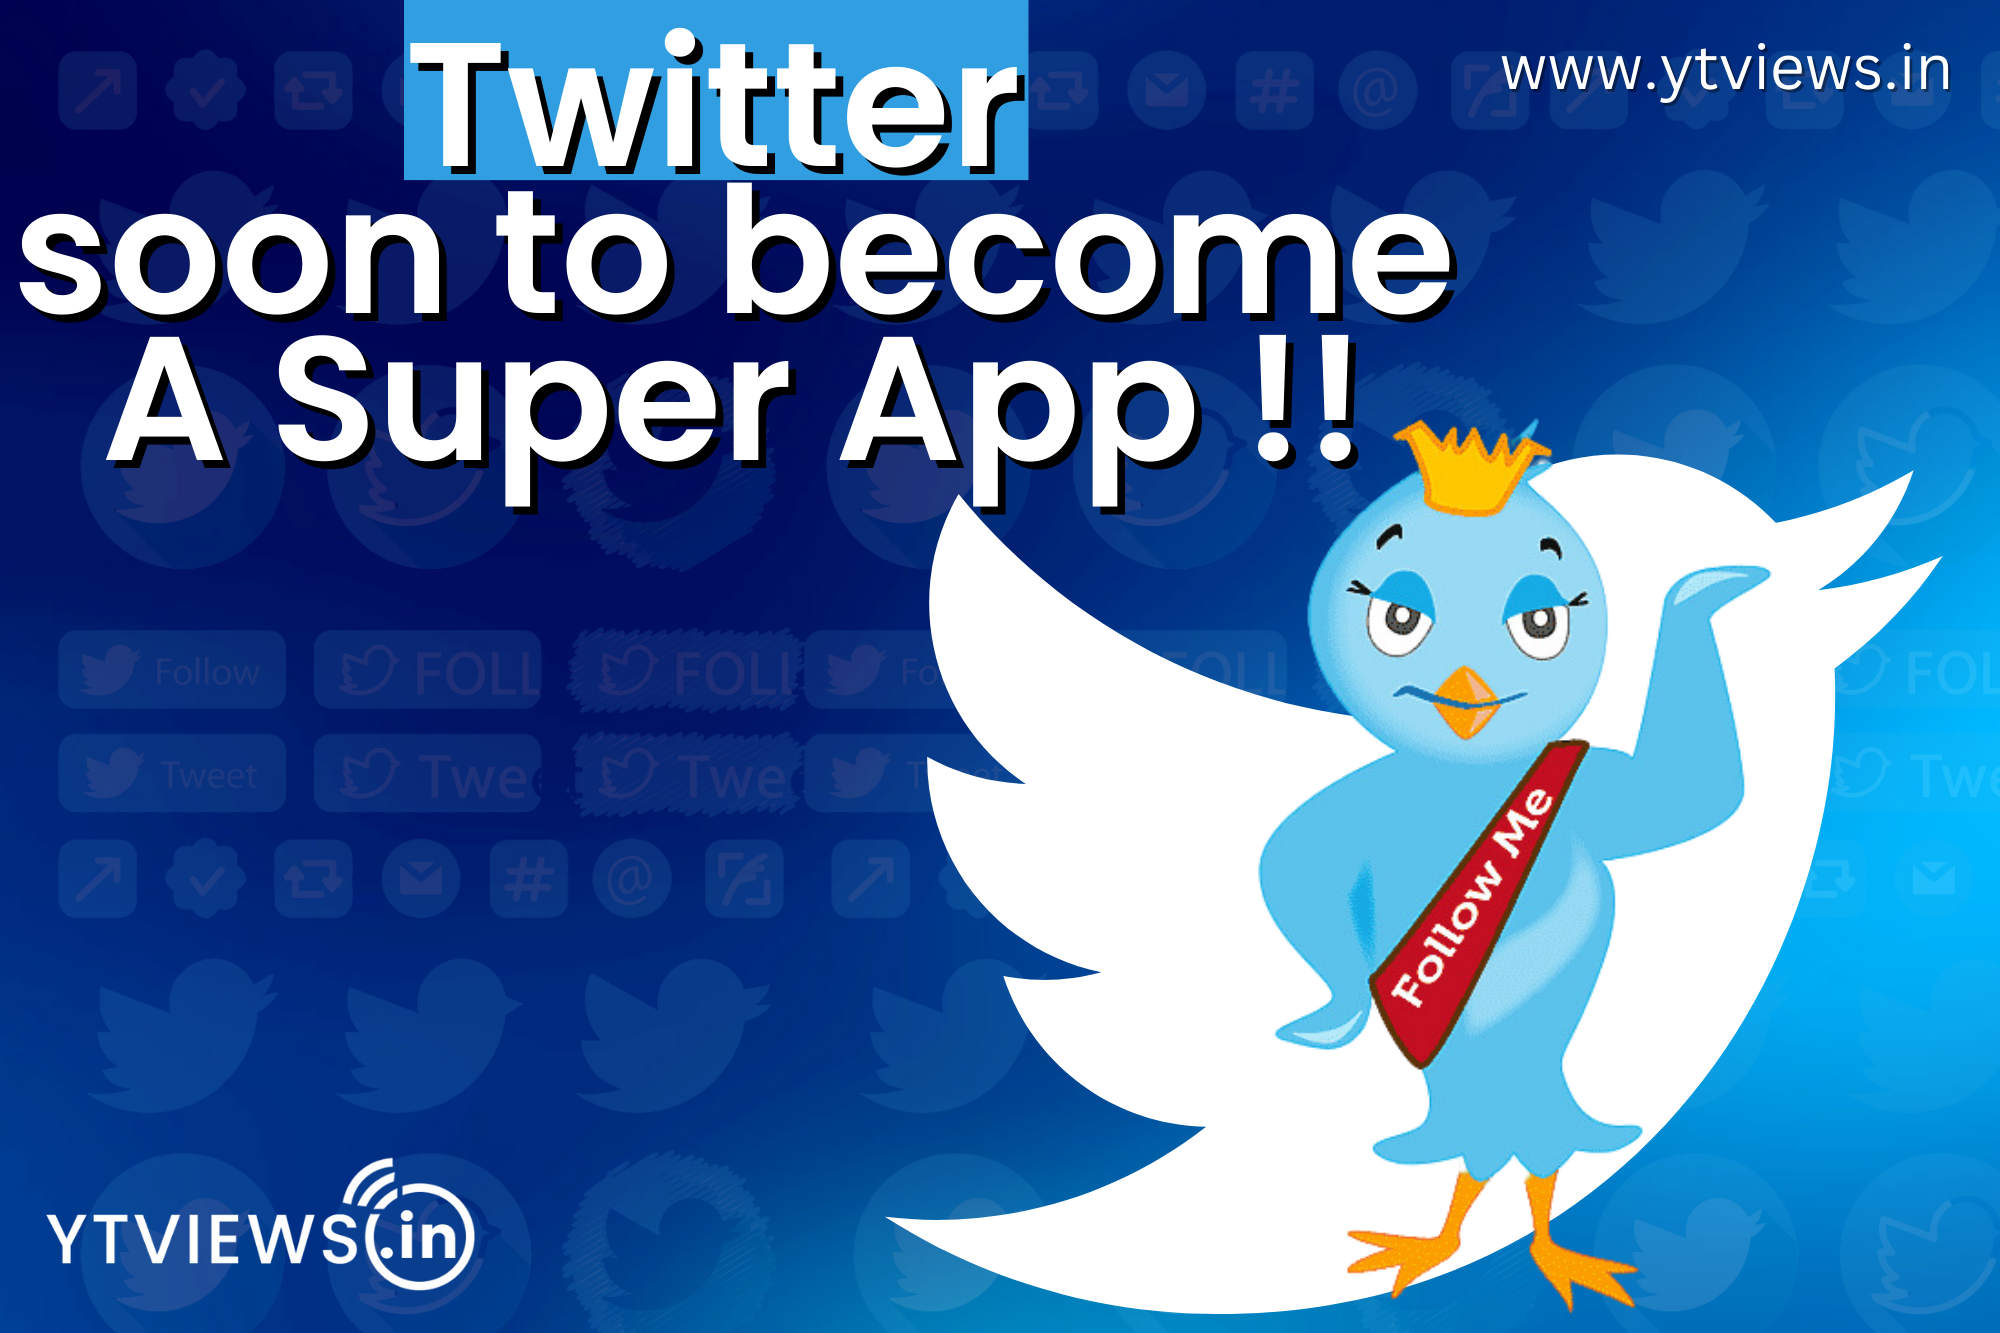 Elon Musk moves one step closer to making Twitter a ‘Super App.’ But what exactly is a super app?